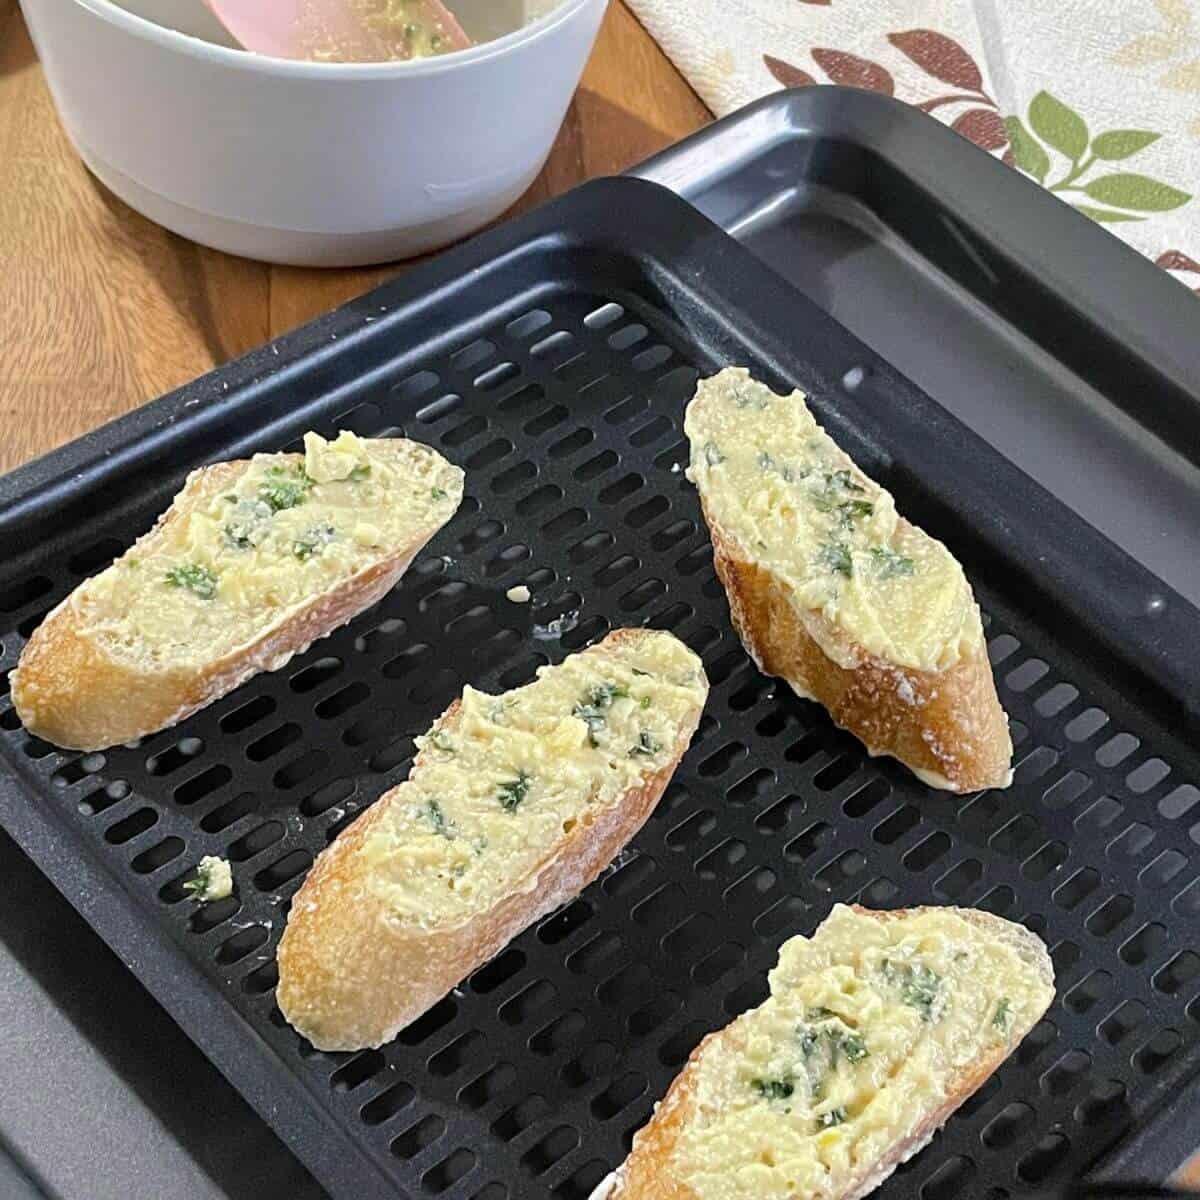 buttered garlic bread slices on air fryer tray.